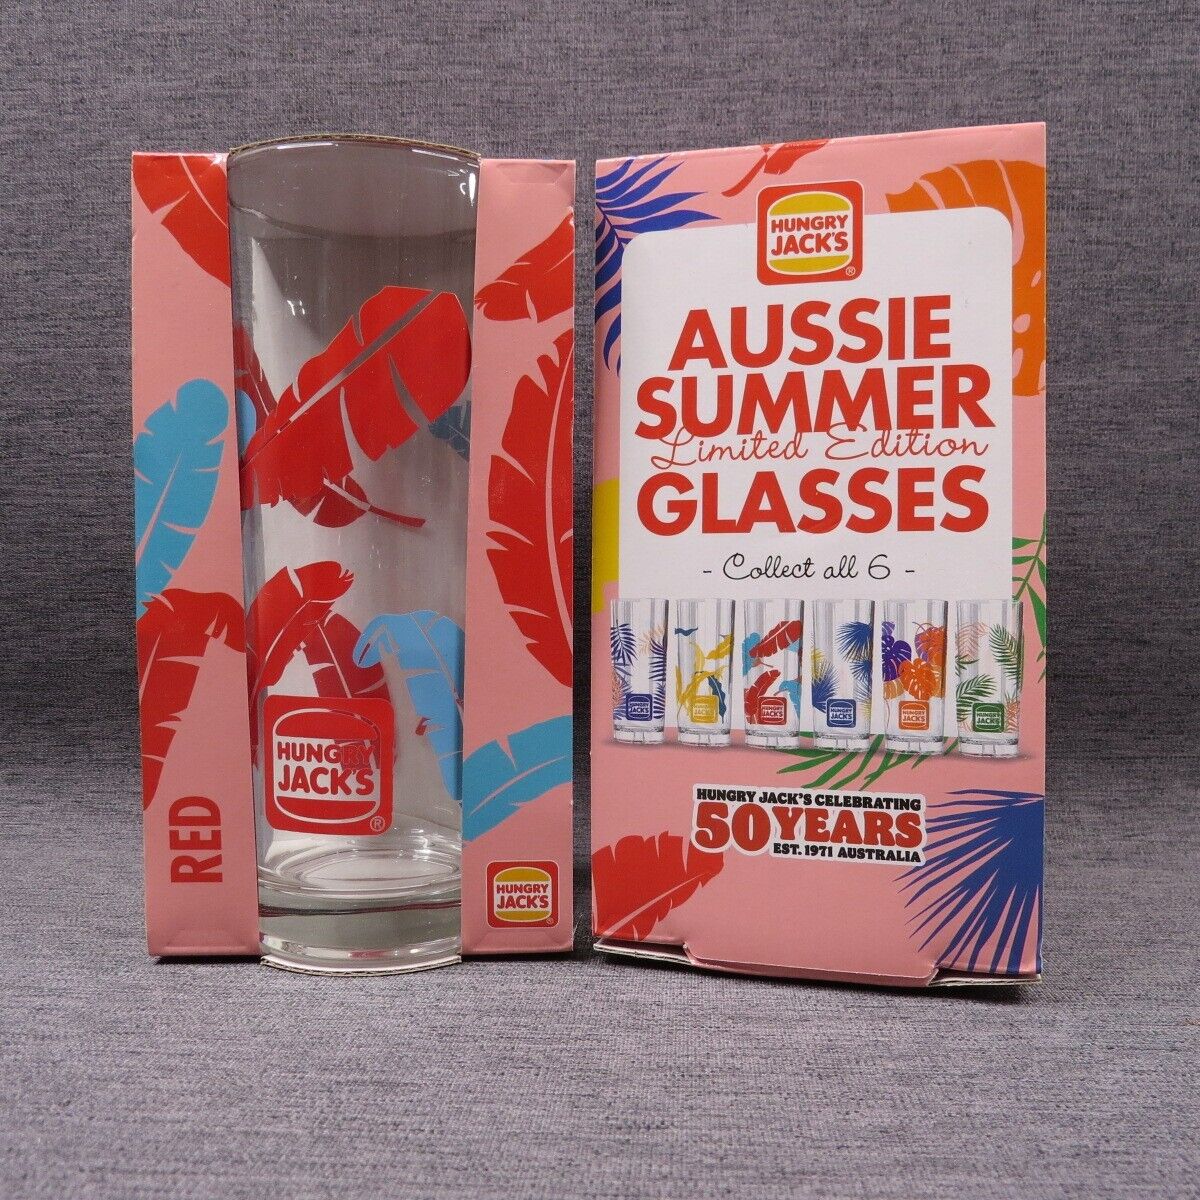 2 x Hungry Jacks Drink Glasses AUSSIE SUMMER 50 YEARS  16cm Tall  Blue Red Boxed